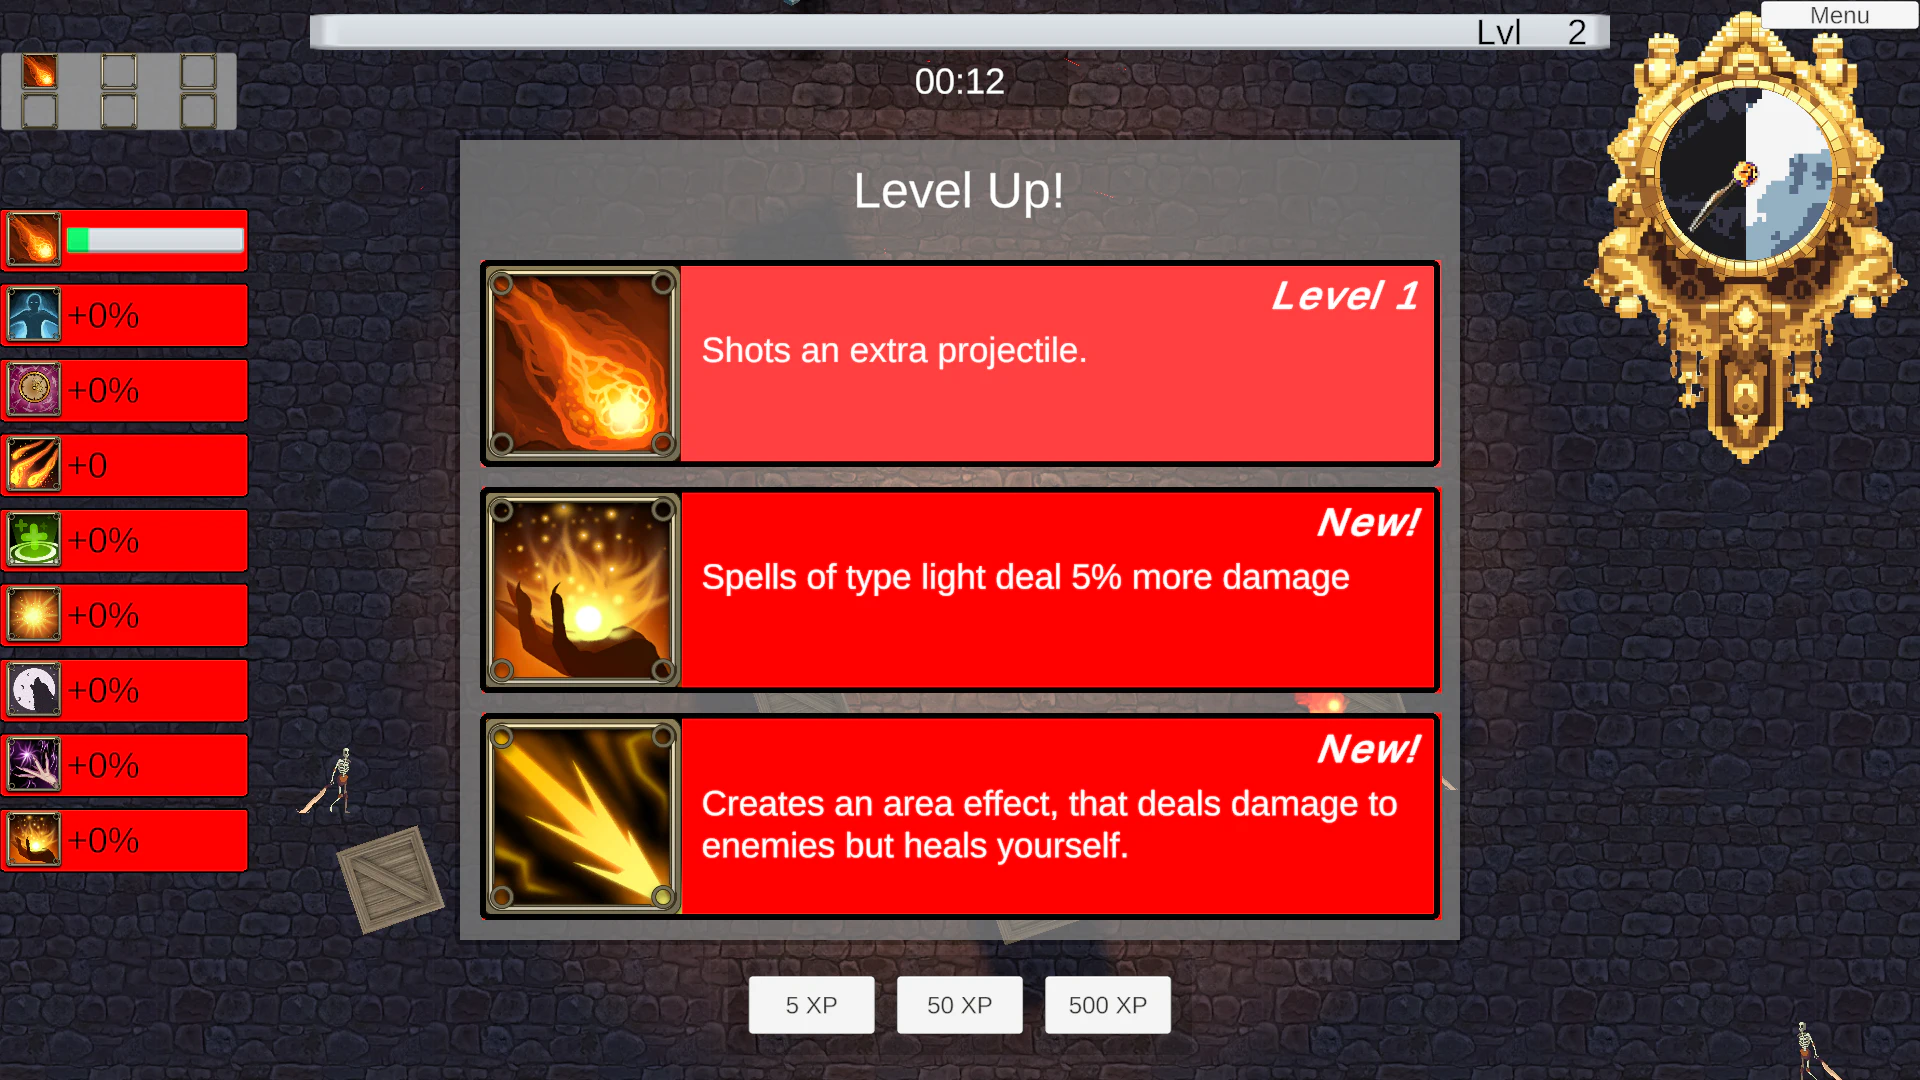 images/game-projects/rd/gallery/2.LevelUpMenu.png